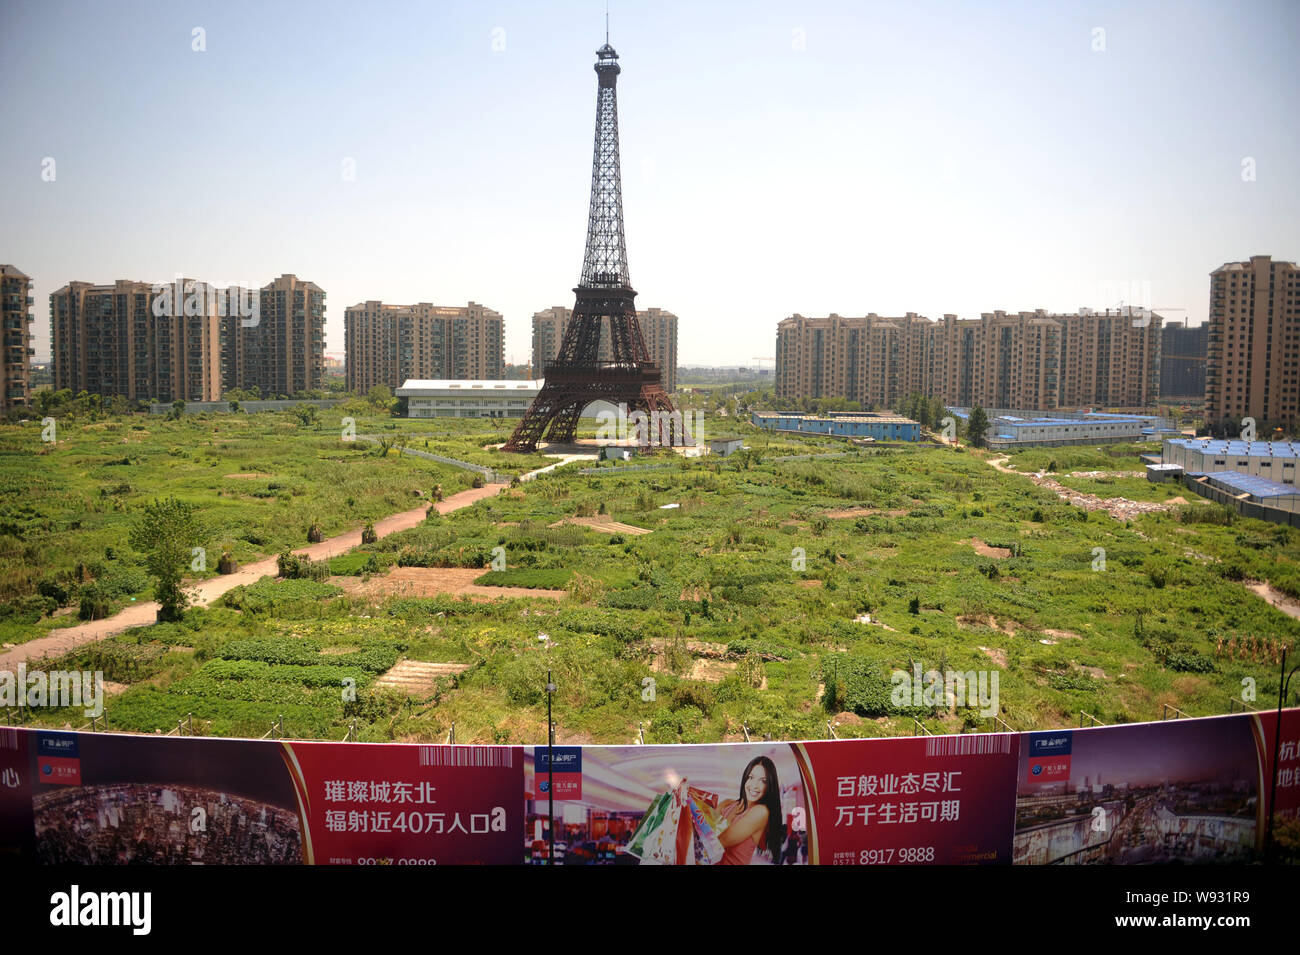 Eiffel Tower cloned in Hangzhou vegetable fields(2/4) - Headlines,  features, photo and videos from , china, news, chinanews, ecns